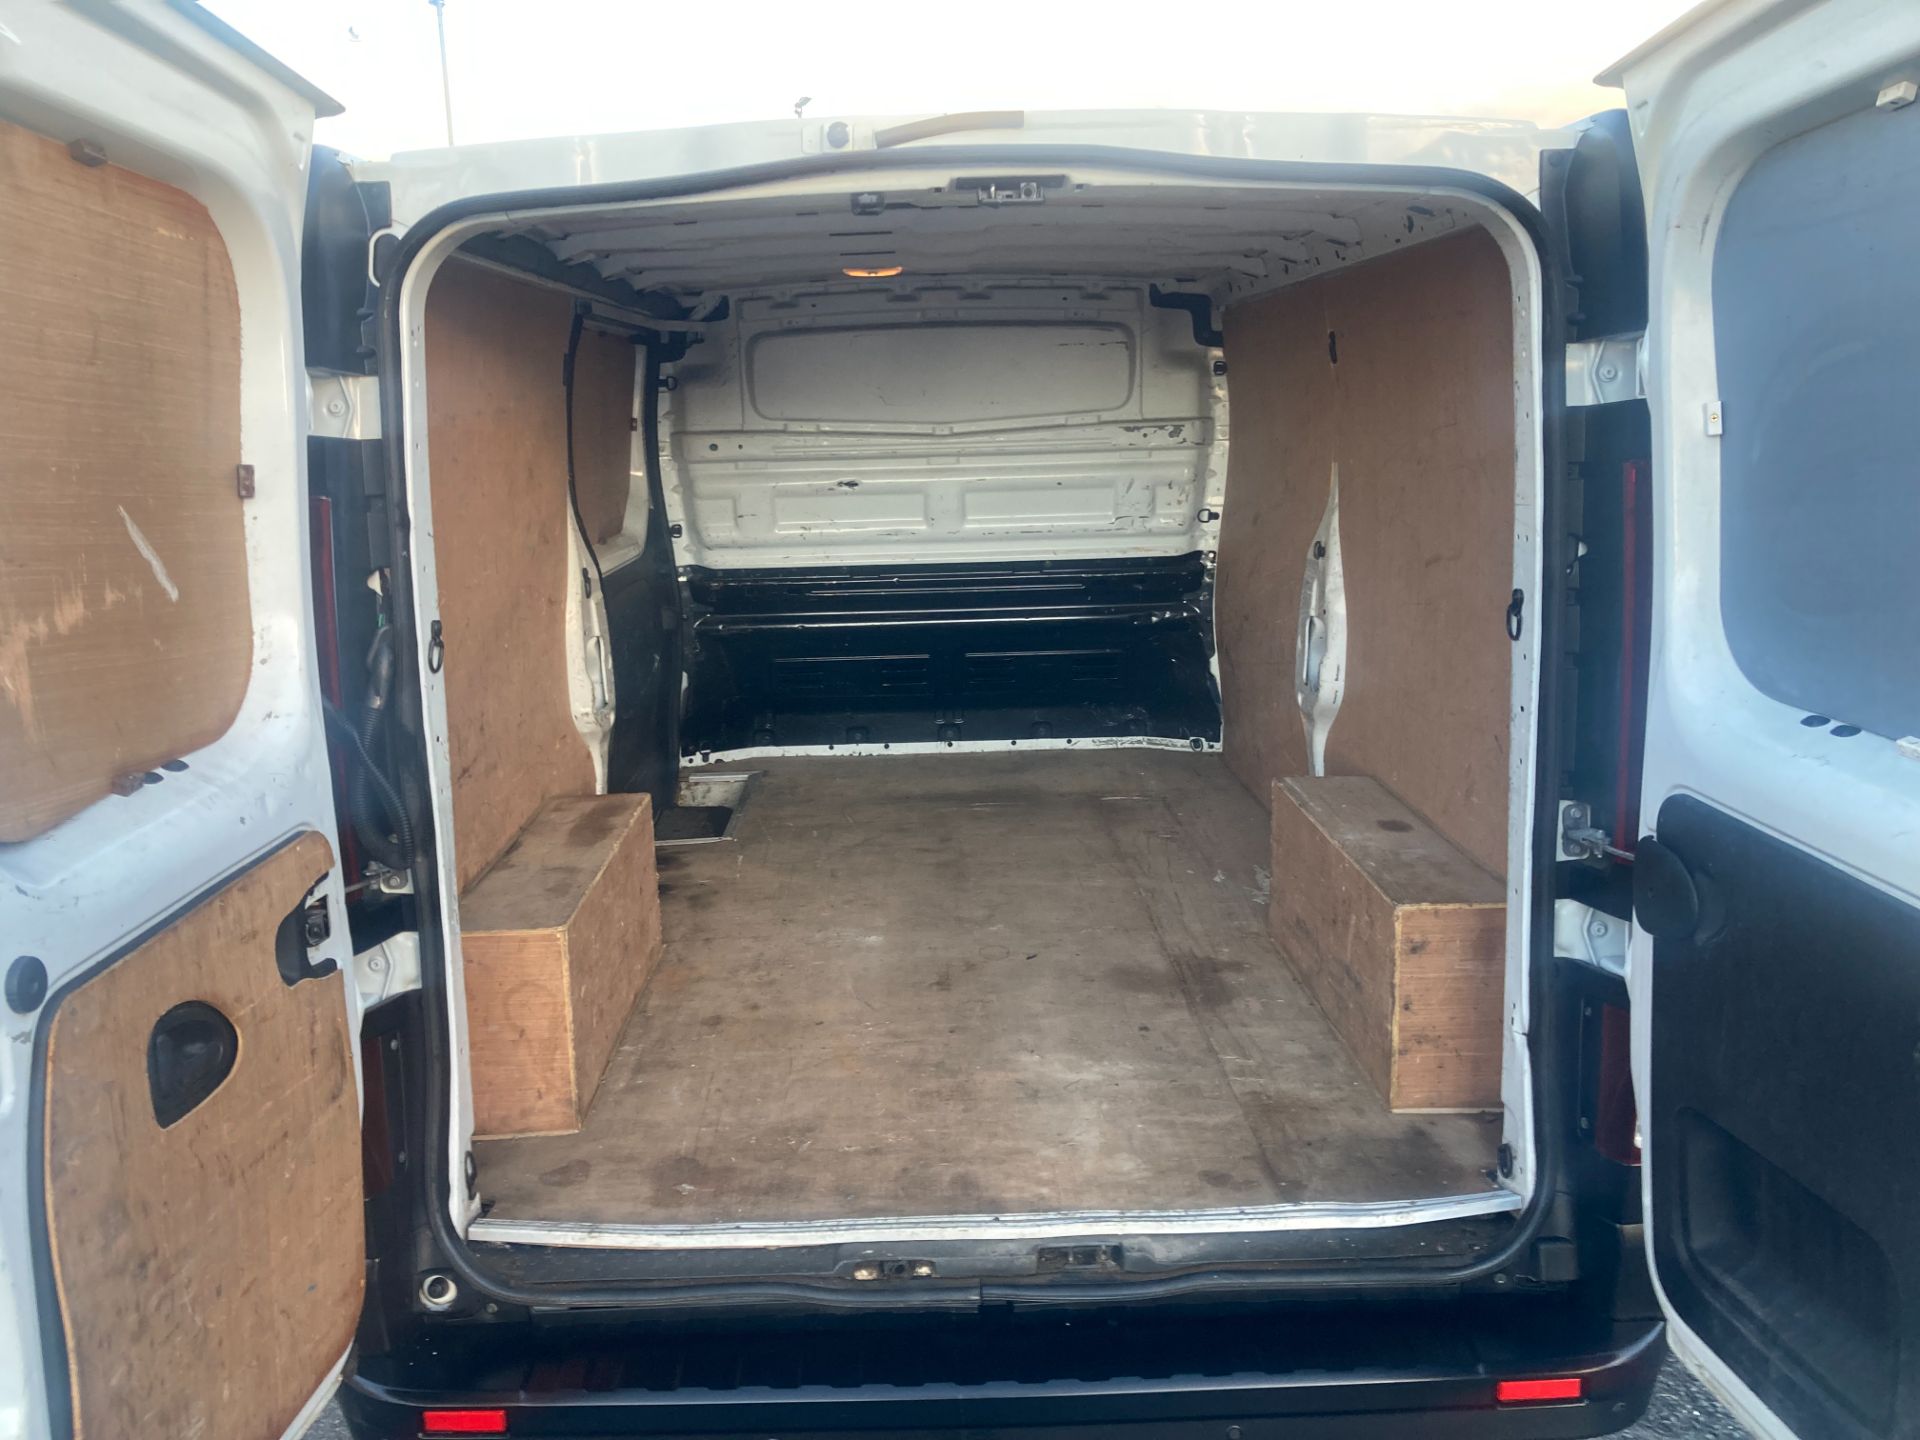 2019 Renault Trafic LL29 DCI 120 Business (191D11663) Thumbnail 9